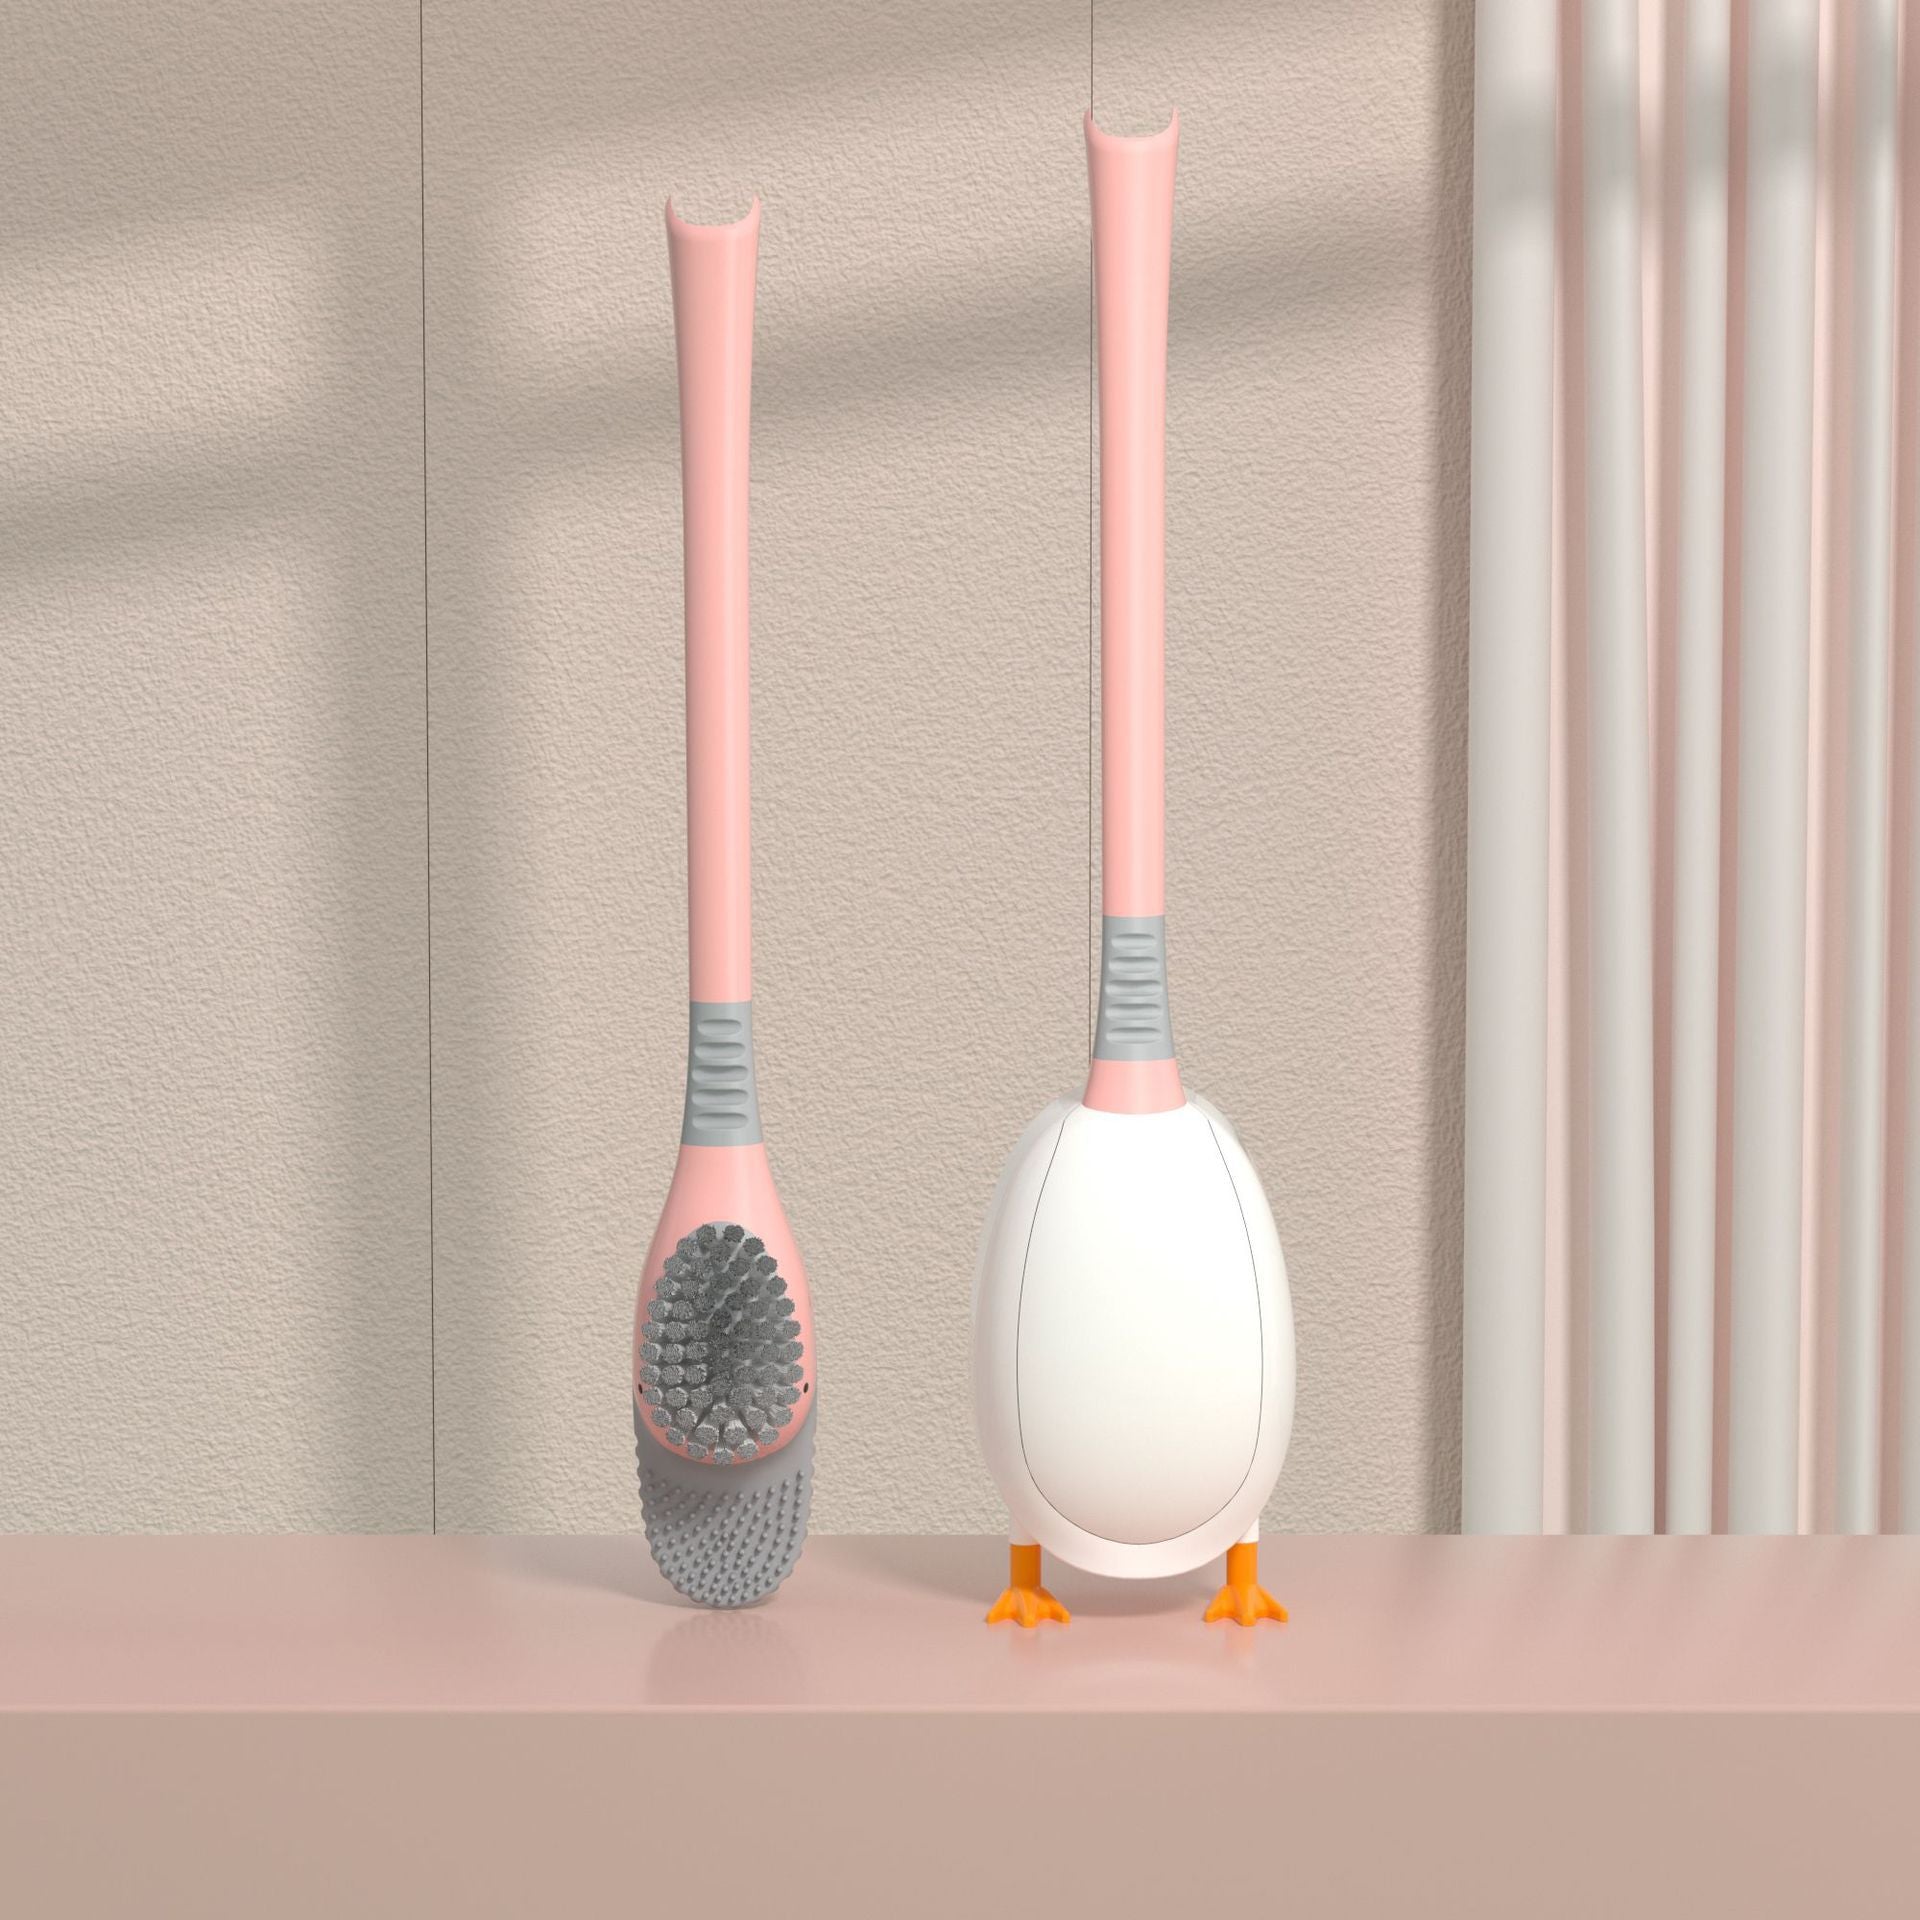 Diving Duck Long Handle Toilet Brush Without Dead Angle - Toilet Brushes -  Trend Goods